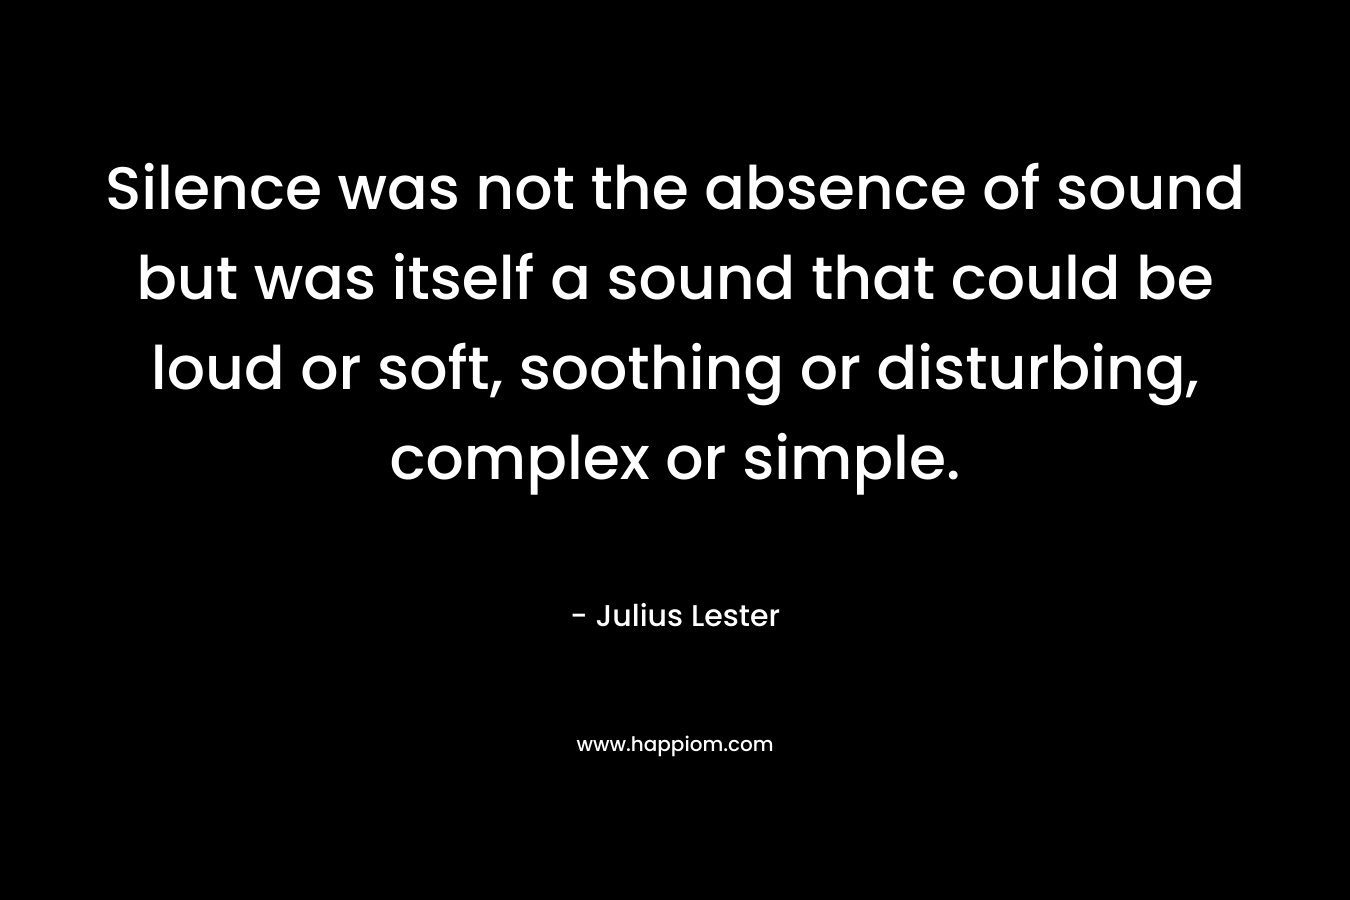 Silence was not the absence of sound but was itself a sound that could be loud or soft, soothing or disturbing, complex or simple.